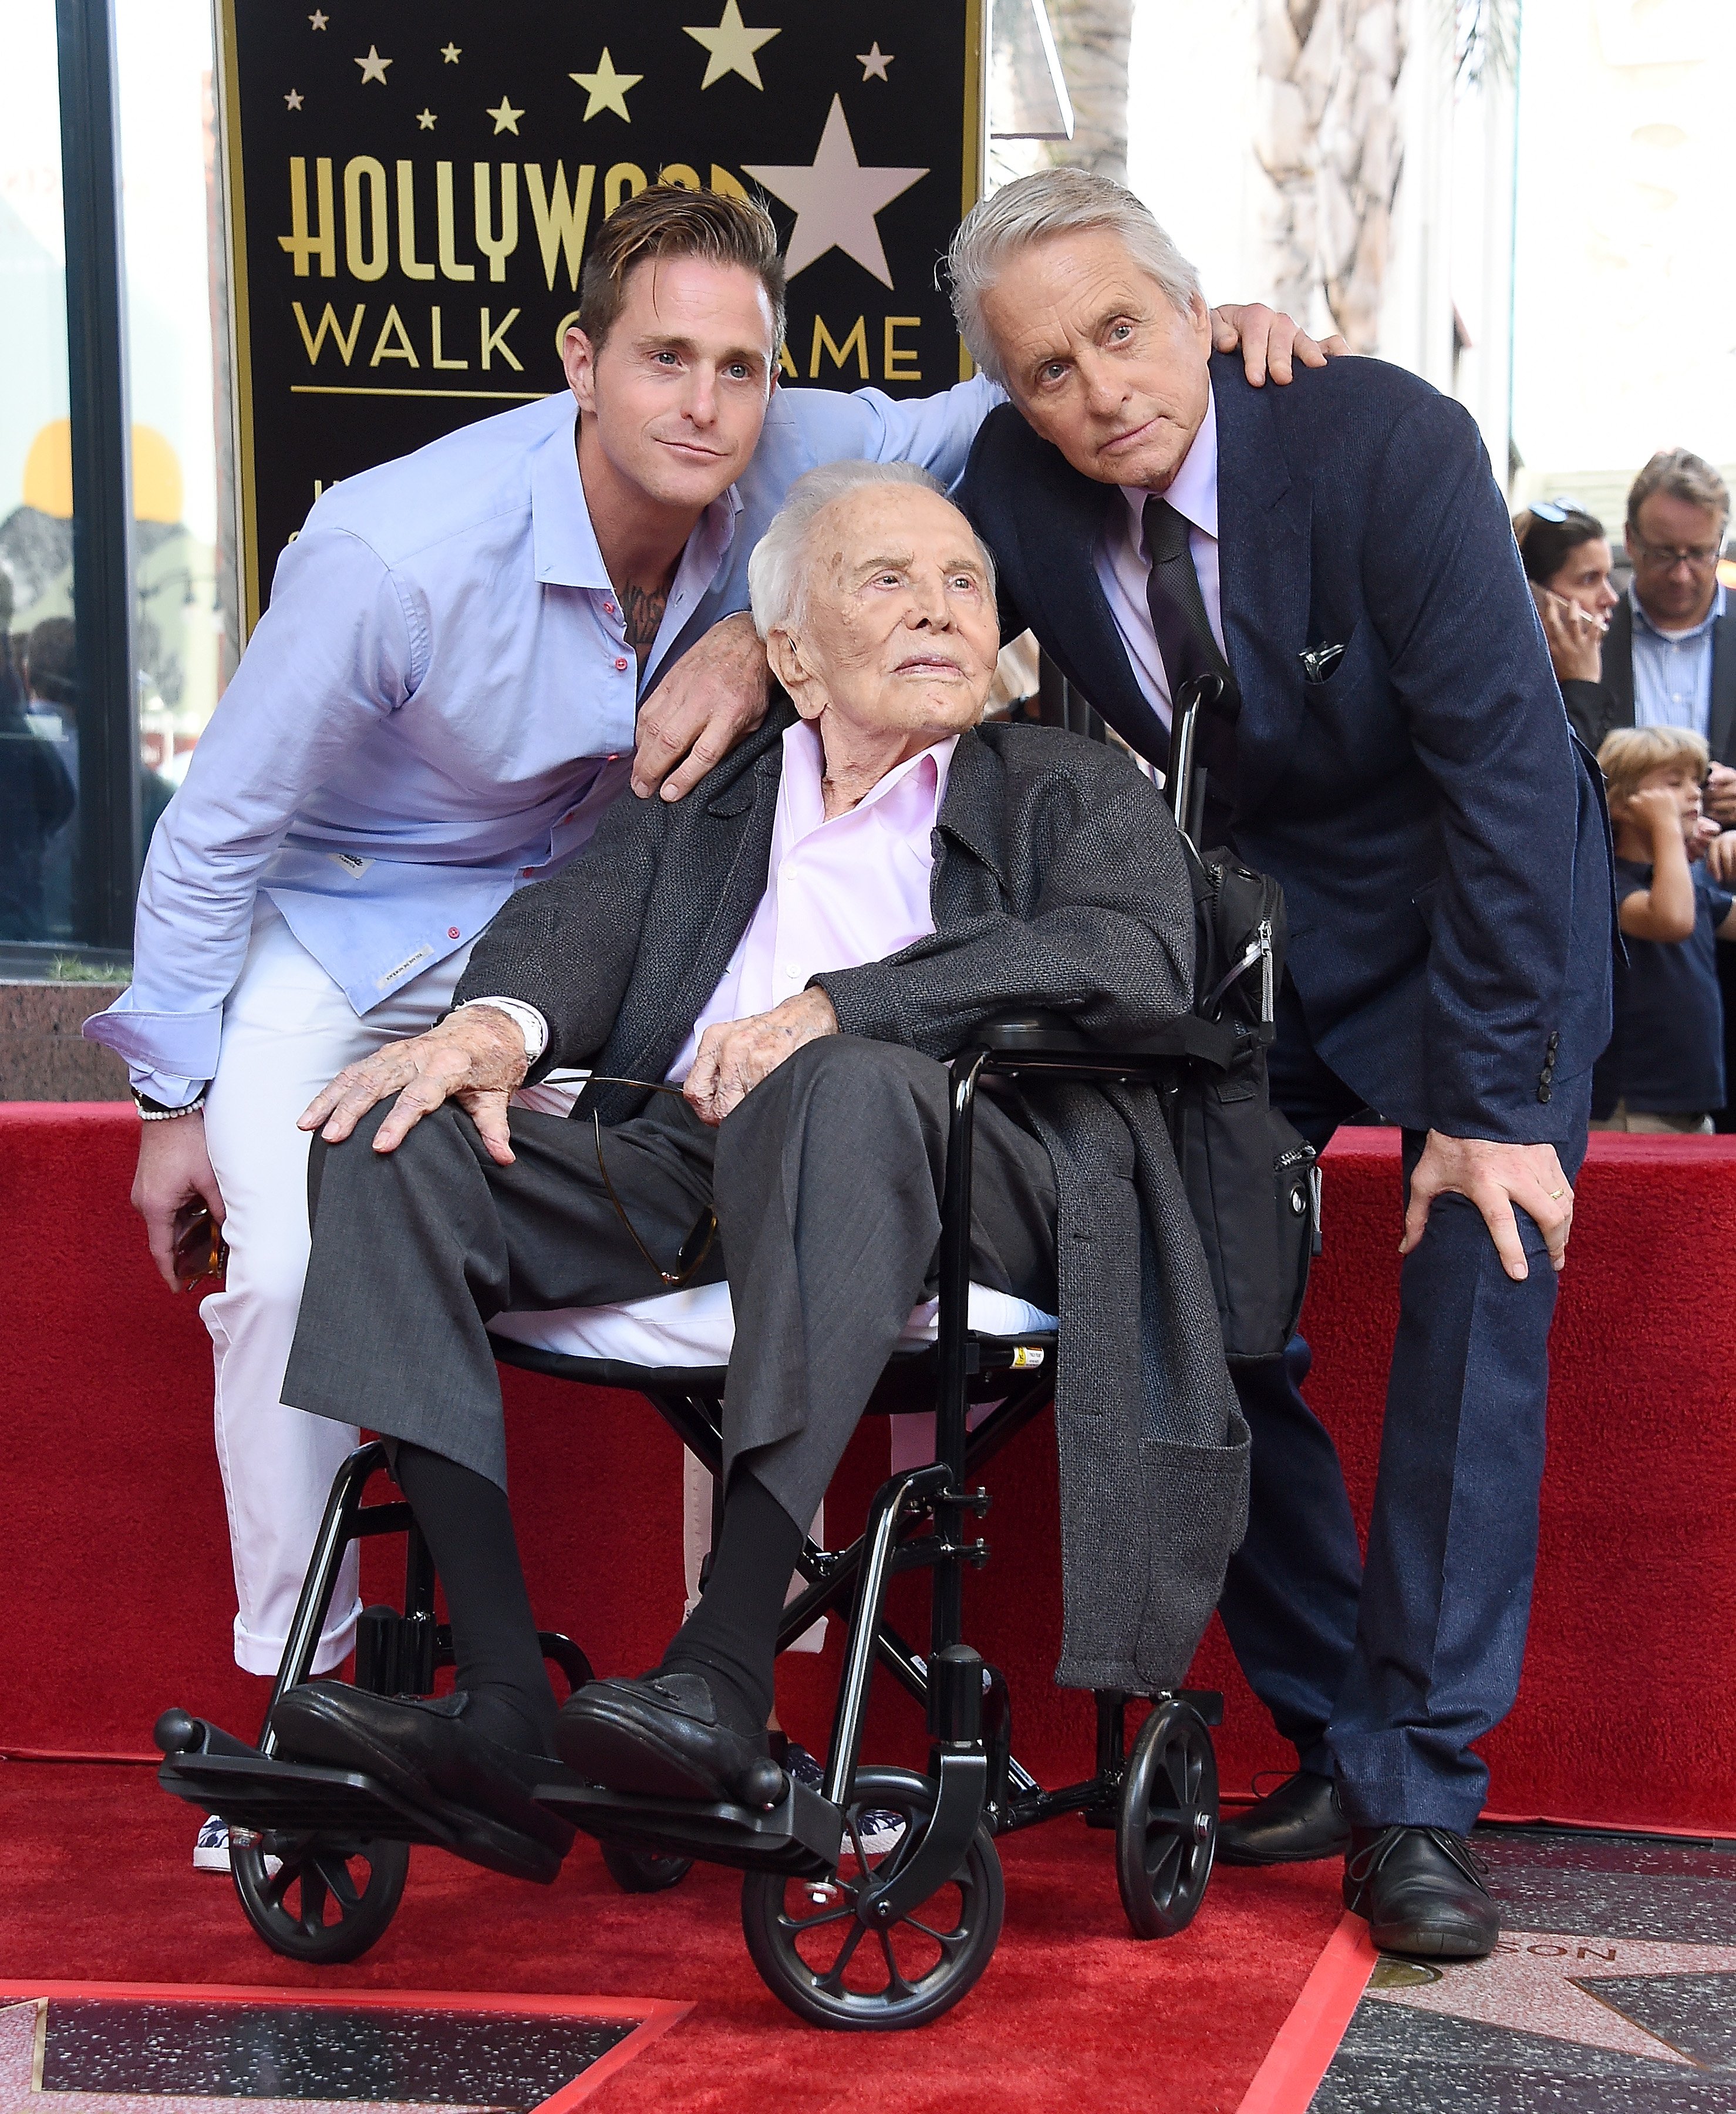 Cameron, Kirk, and Michael Douglas pose at the Michael Douglas Star On The Hollywood Walk Of Fame ceremony on November 6, 2018 in Hollywood, California | Photo: Getty Images